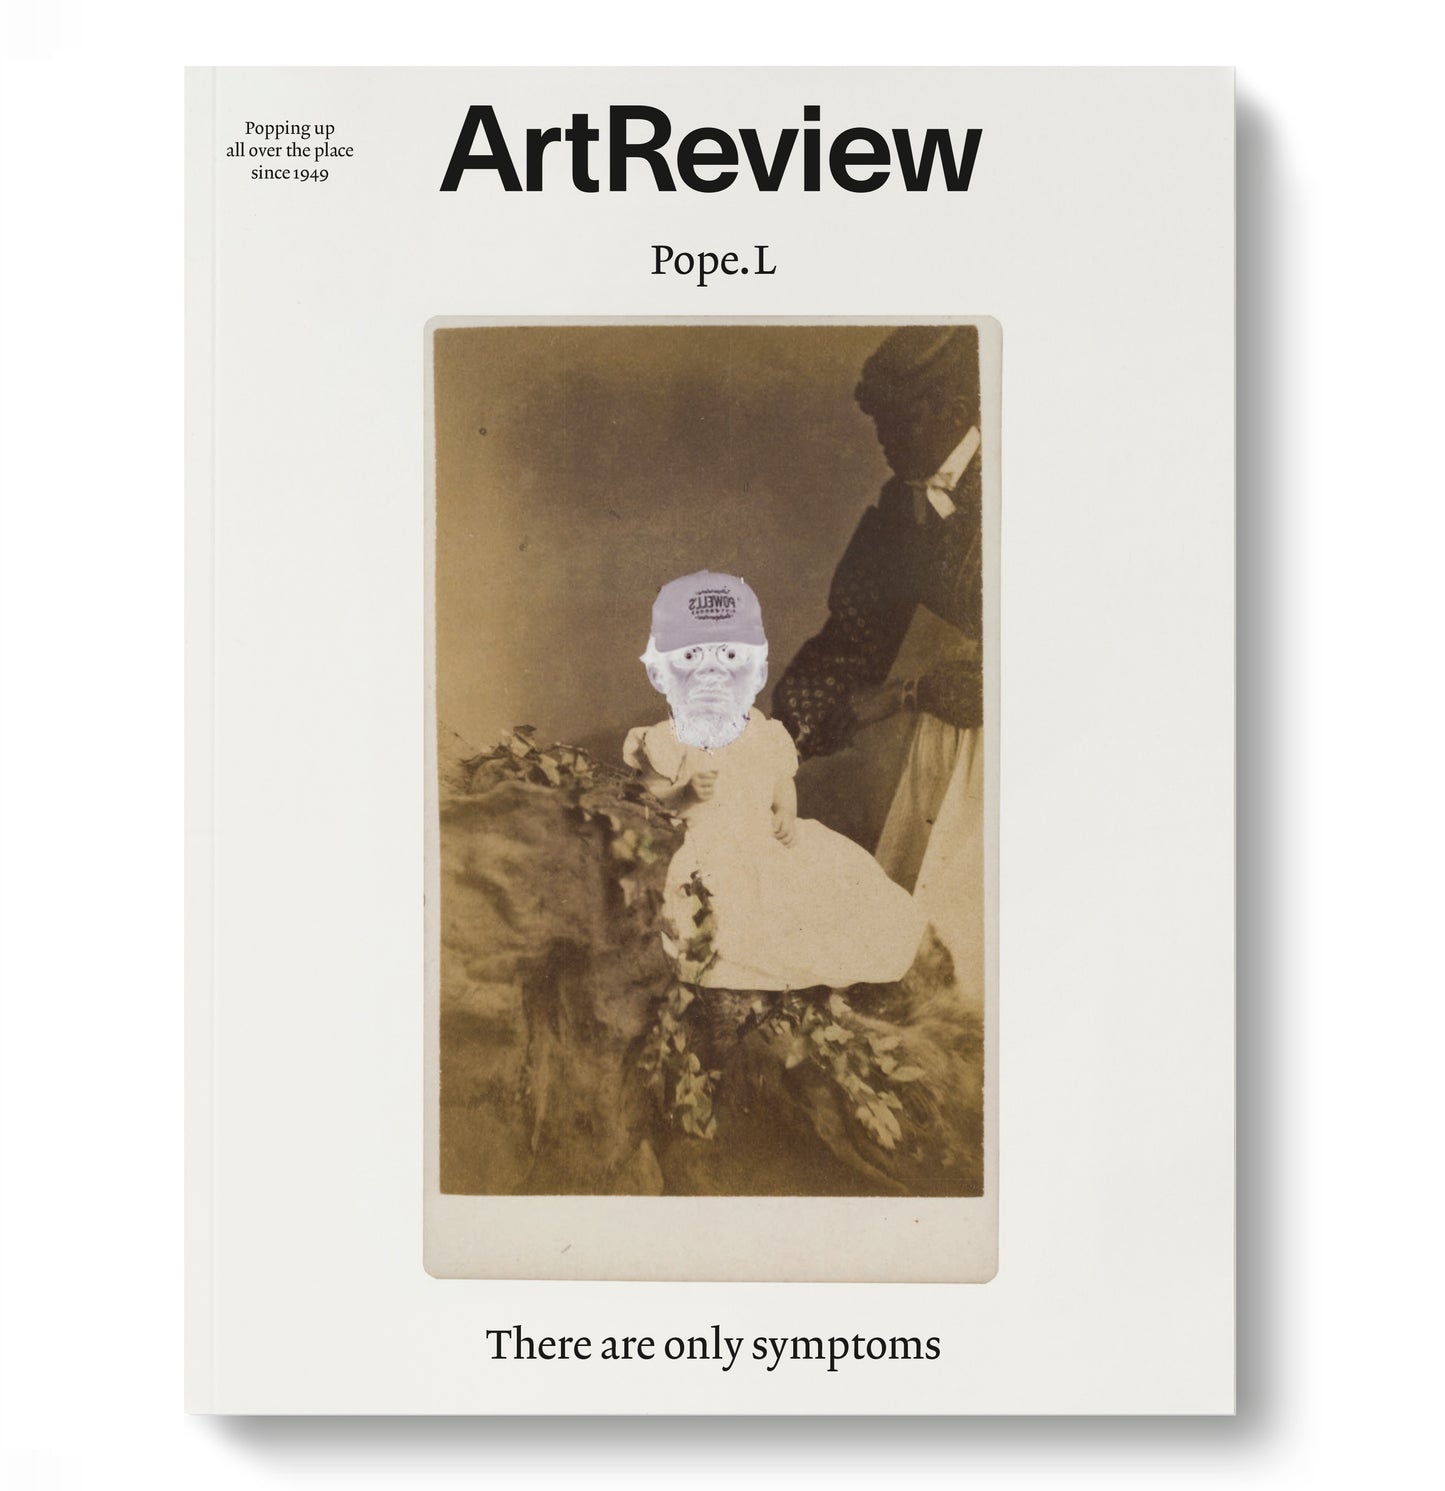 ArtReview October 2019